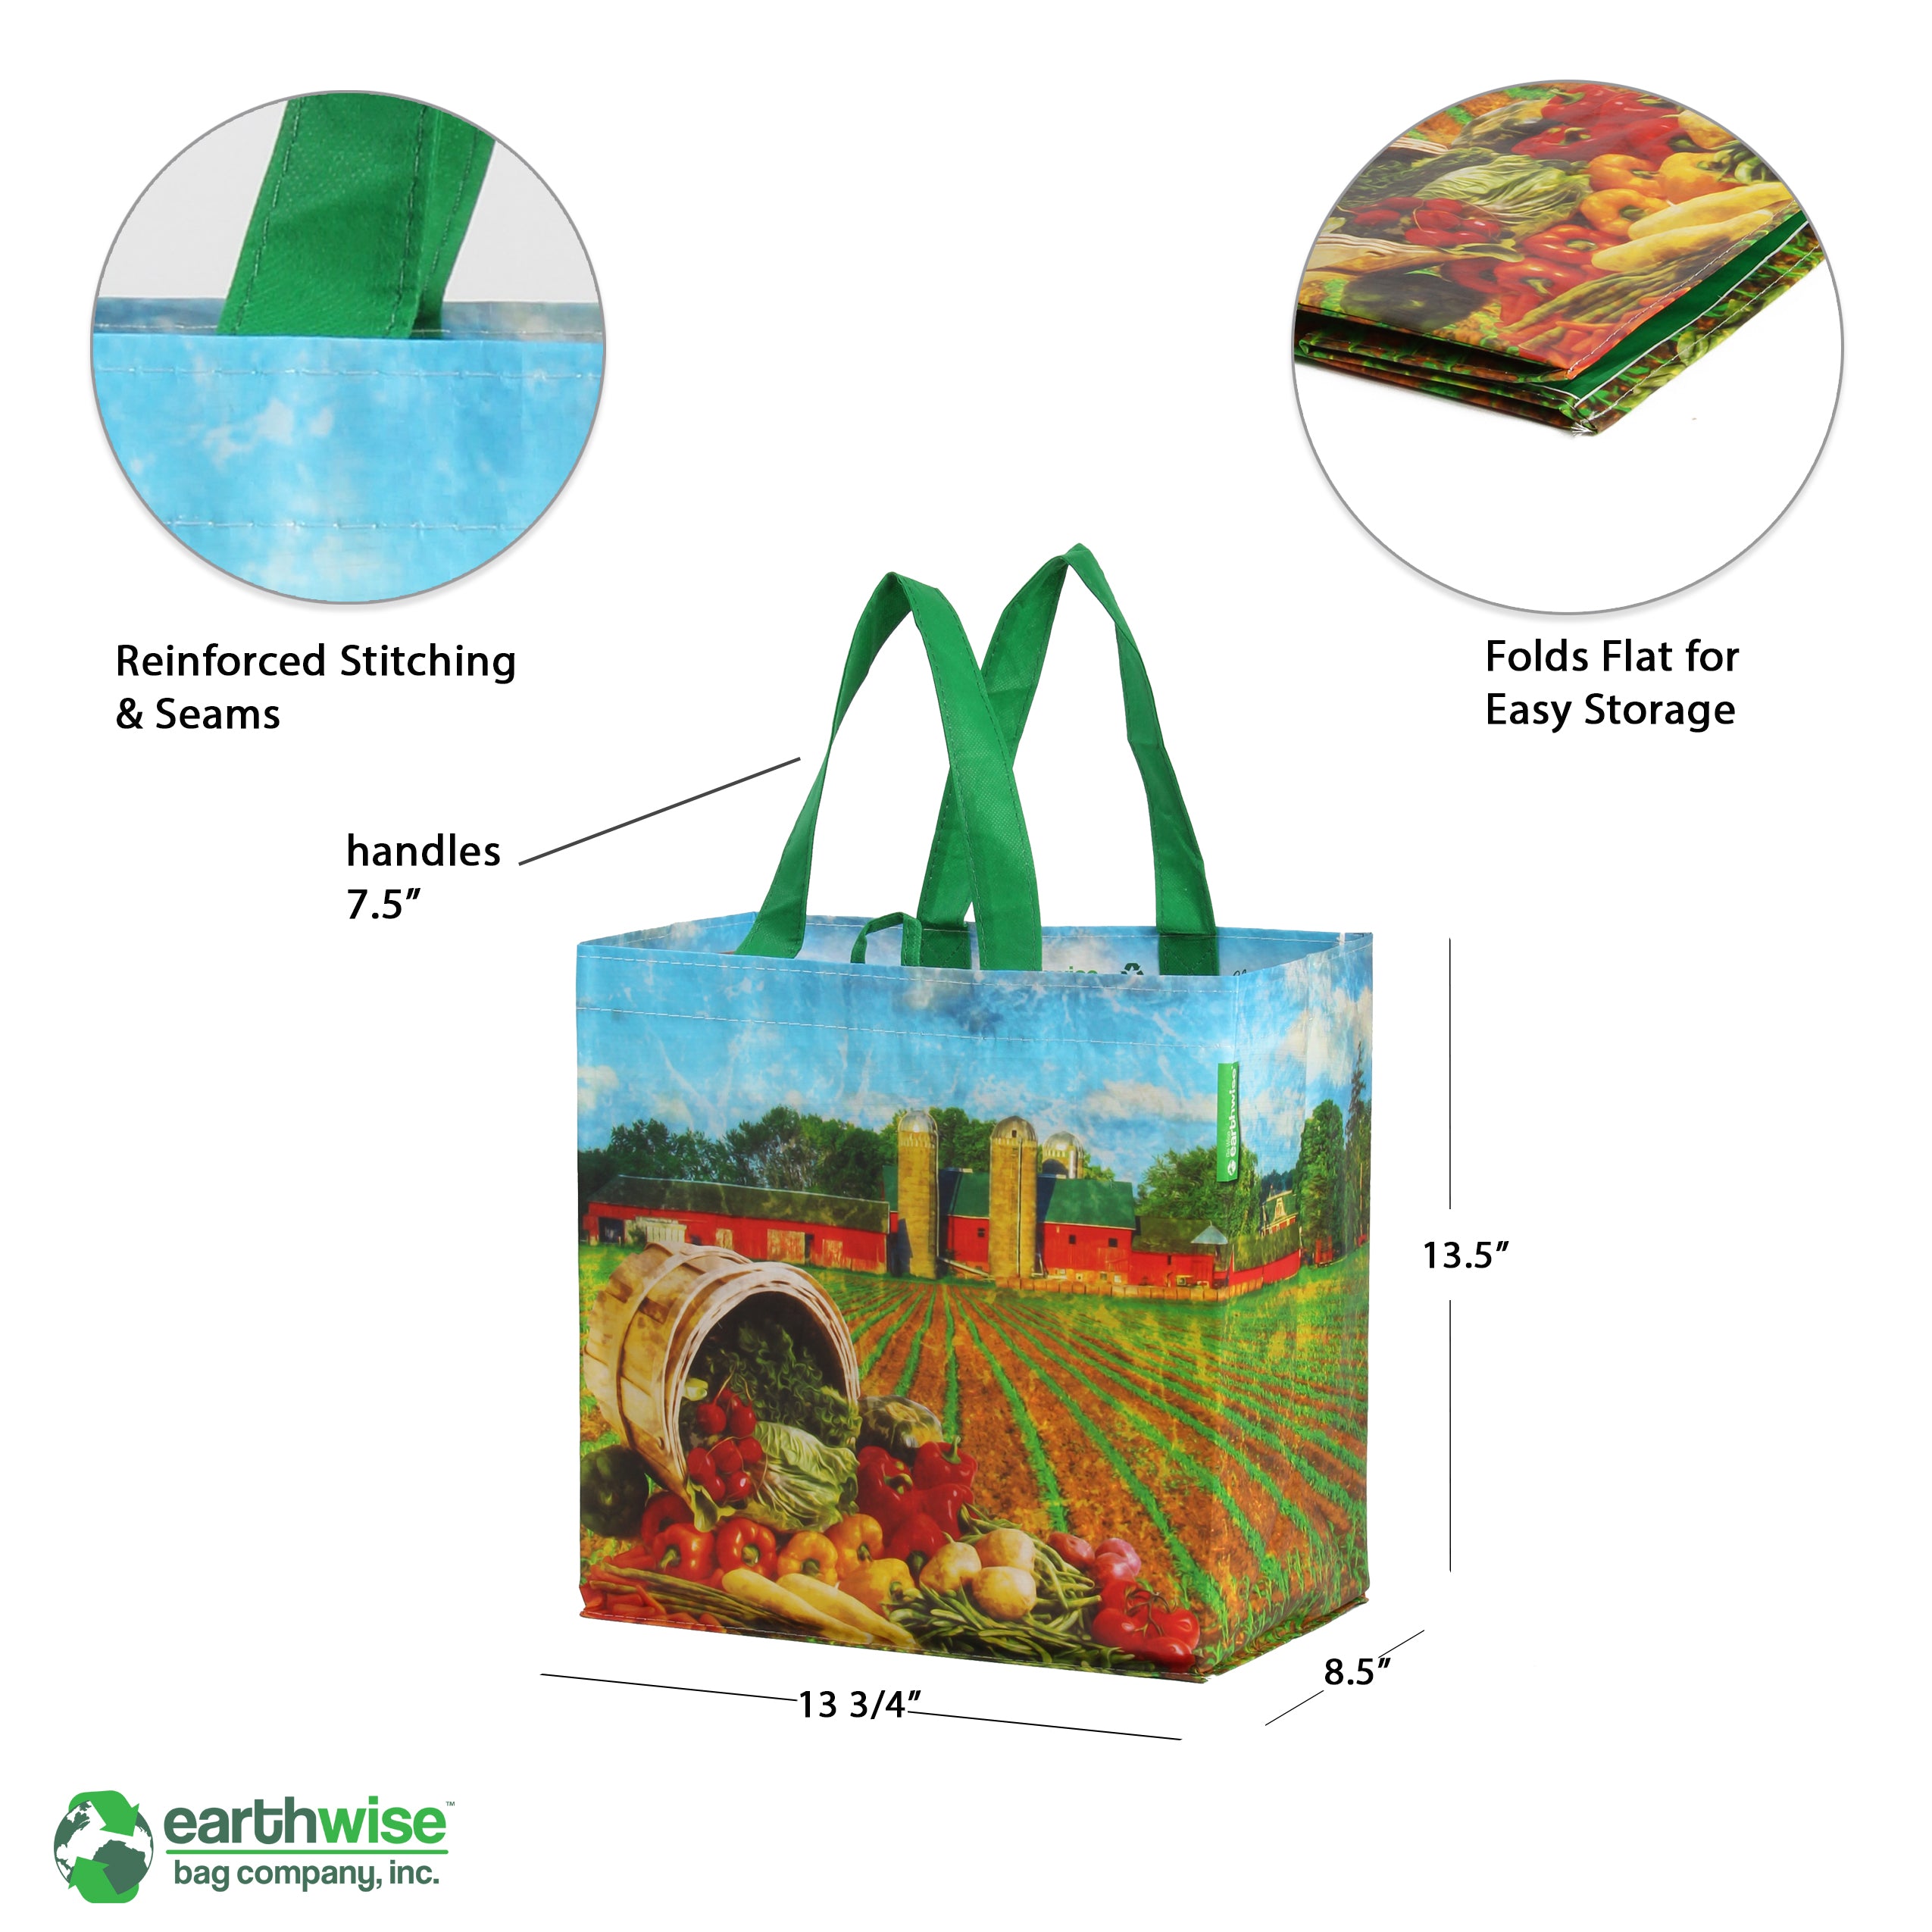 Reusable Bags Follow these Tips from Earthwise to Protect You and the  Environment